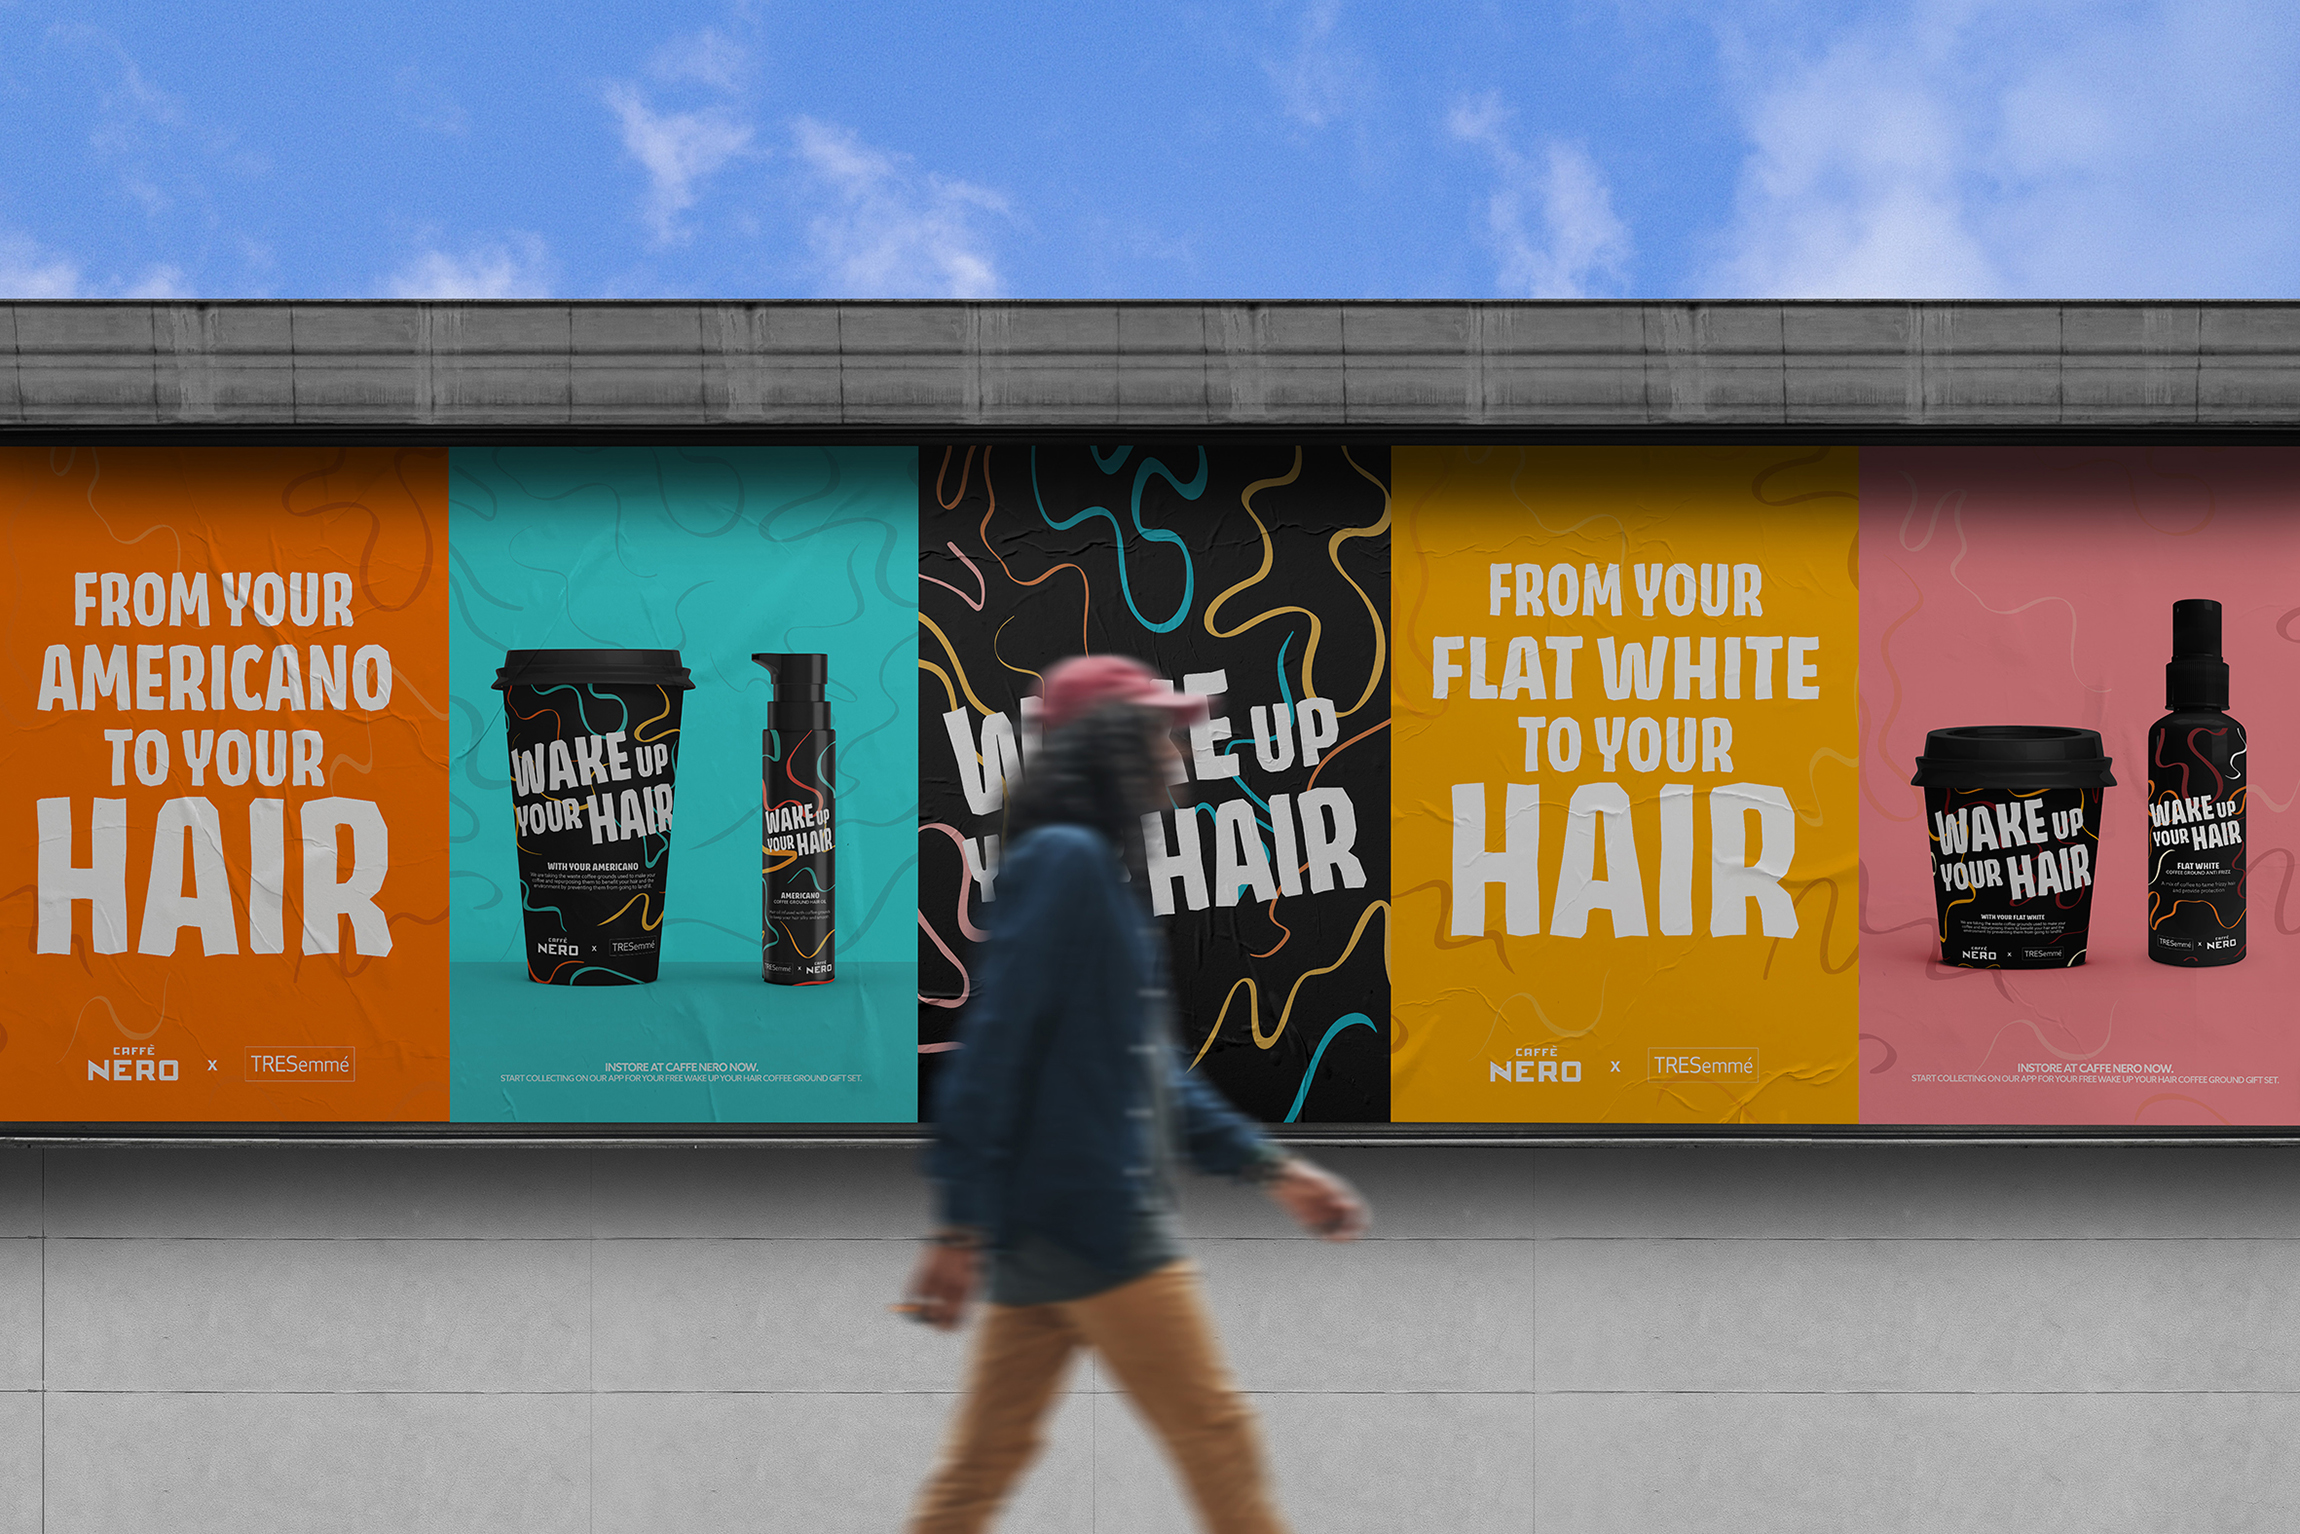 Vibrant wall advertisements that tell the story of the Wake Up Your Hair brand.